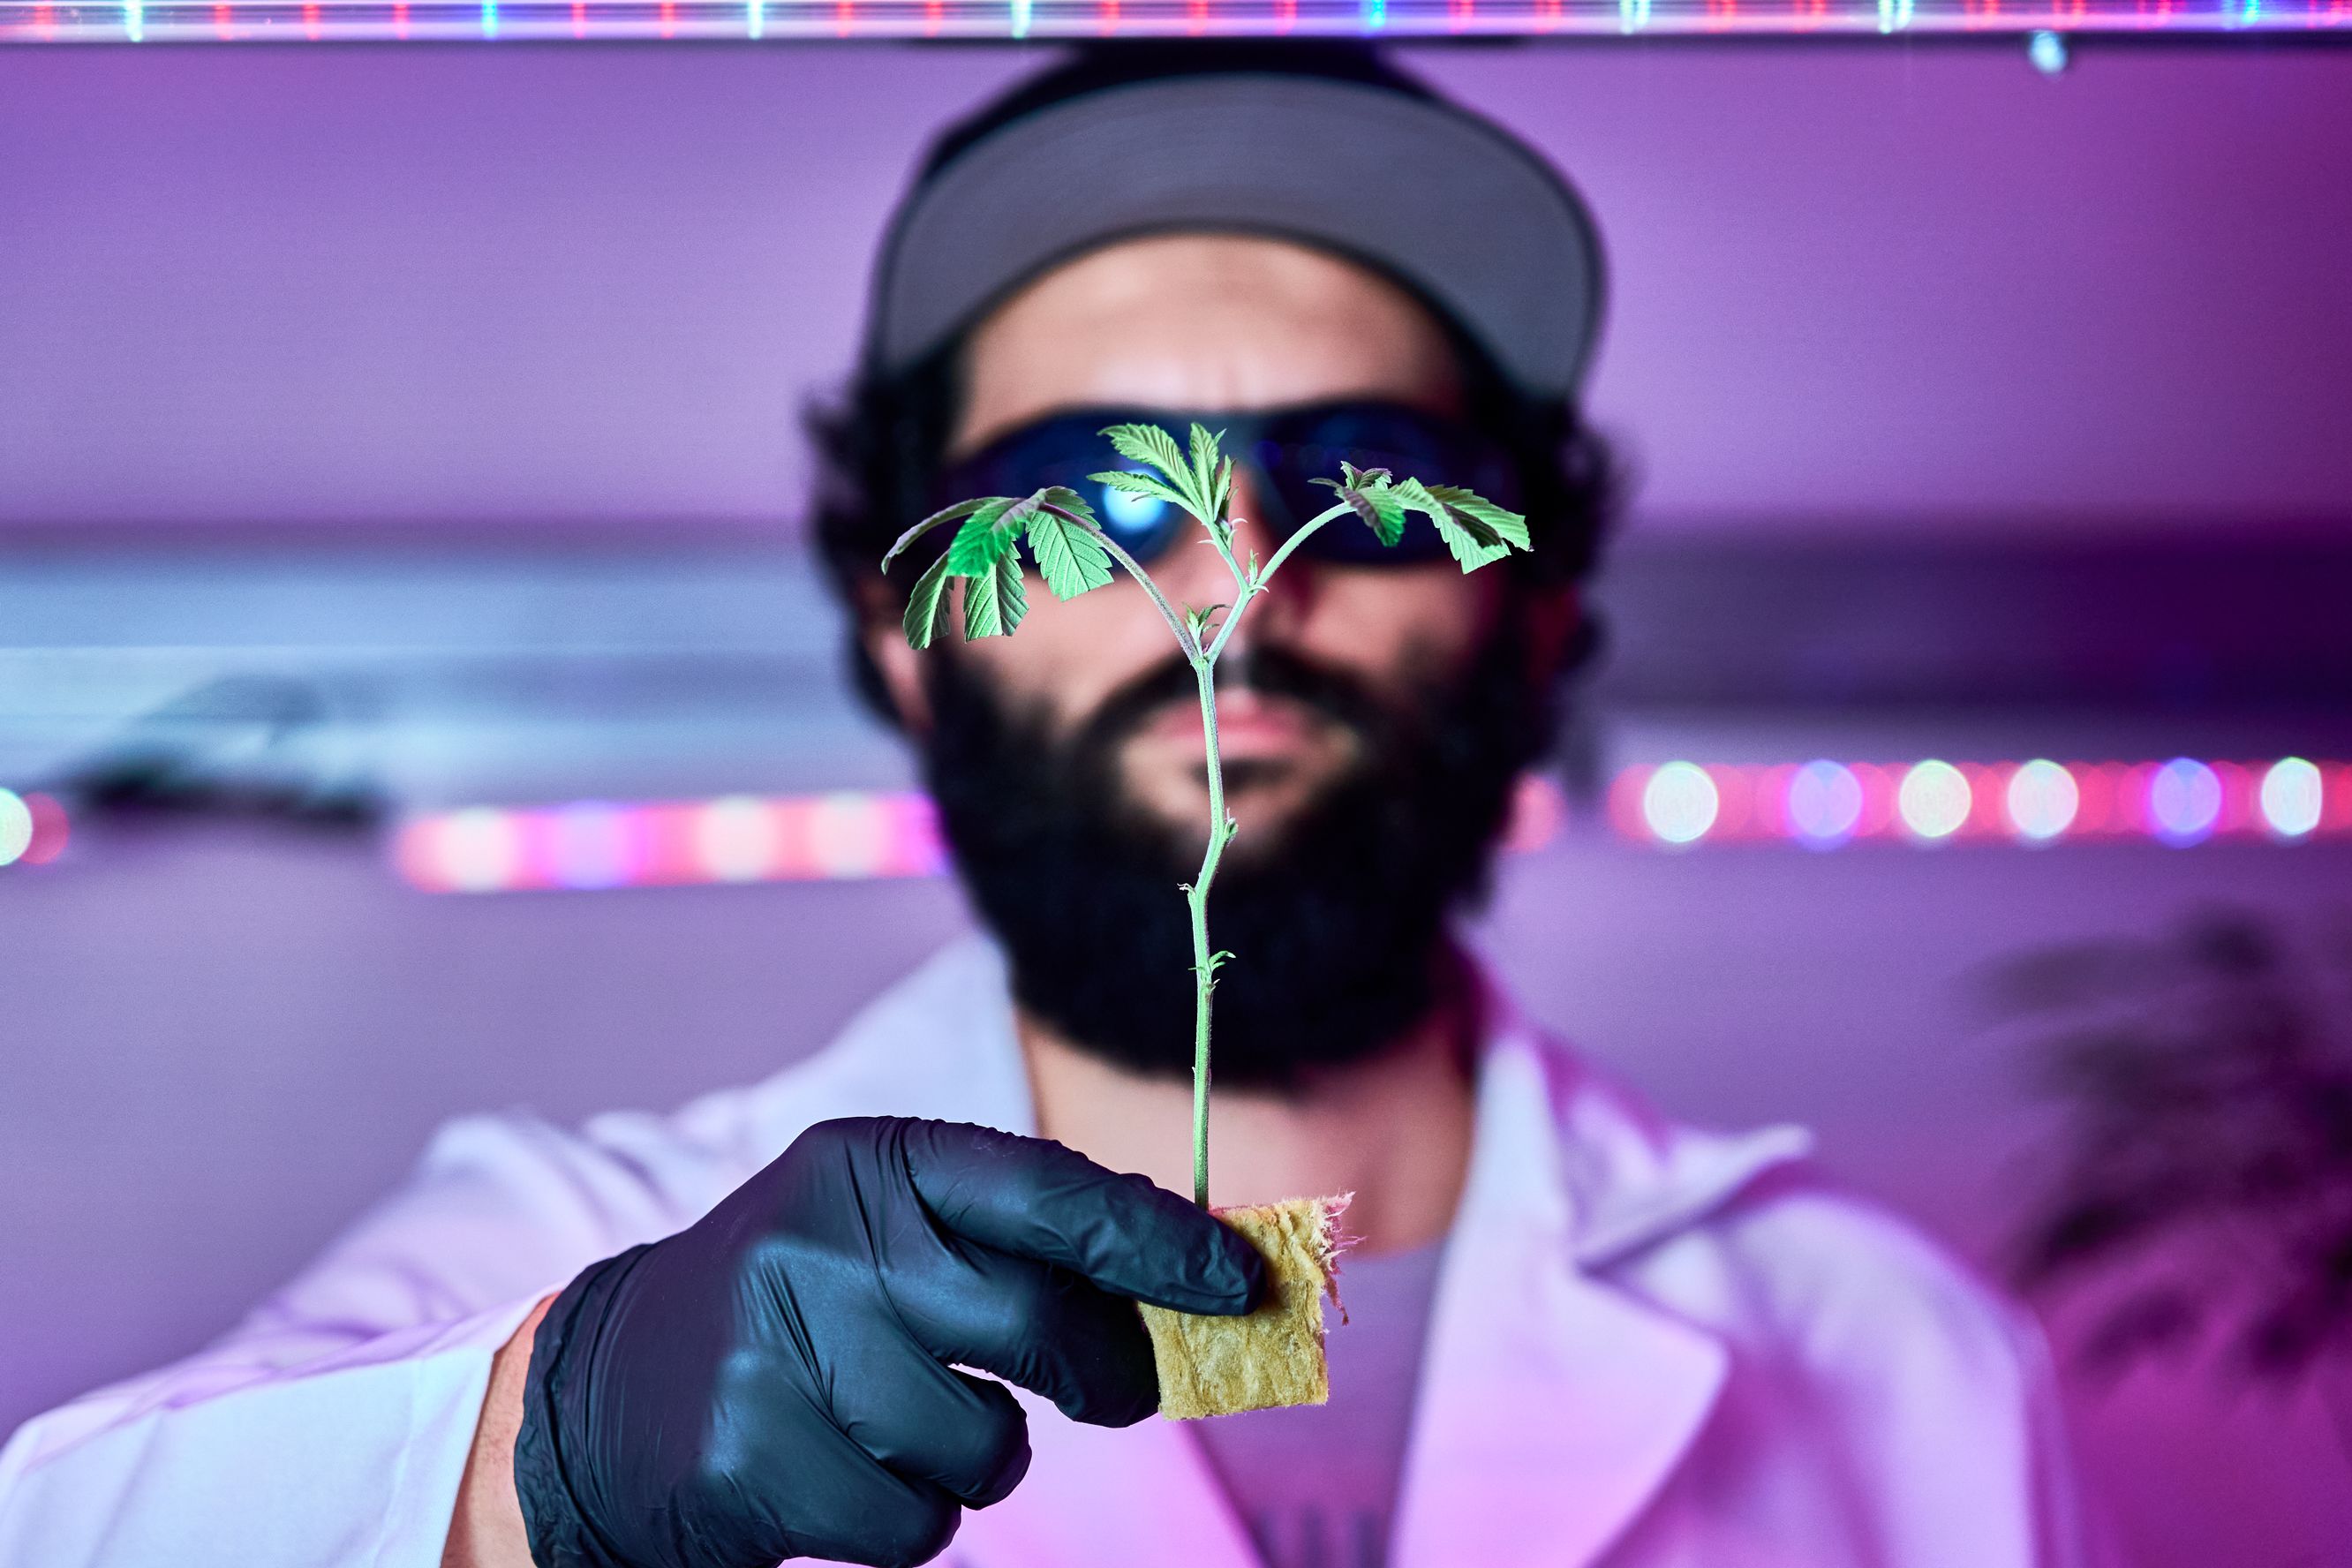 Javier Varela wearing protective glasses and a lab coat holds a cloned cannabis plant